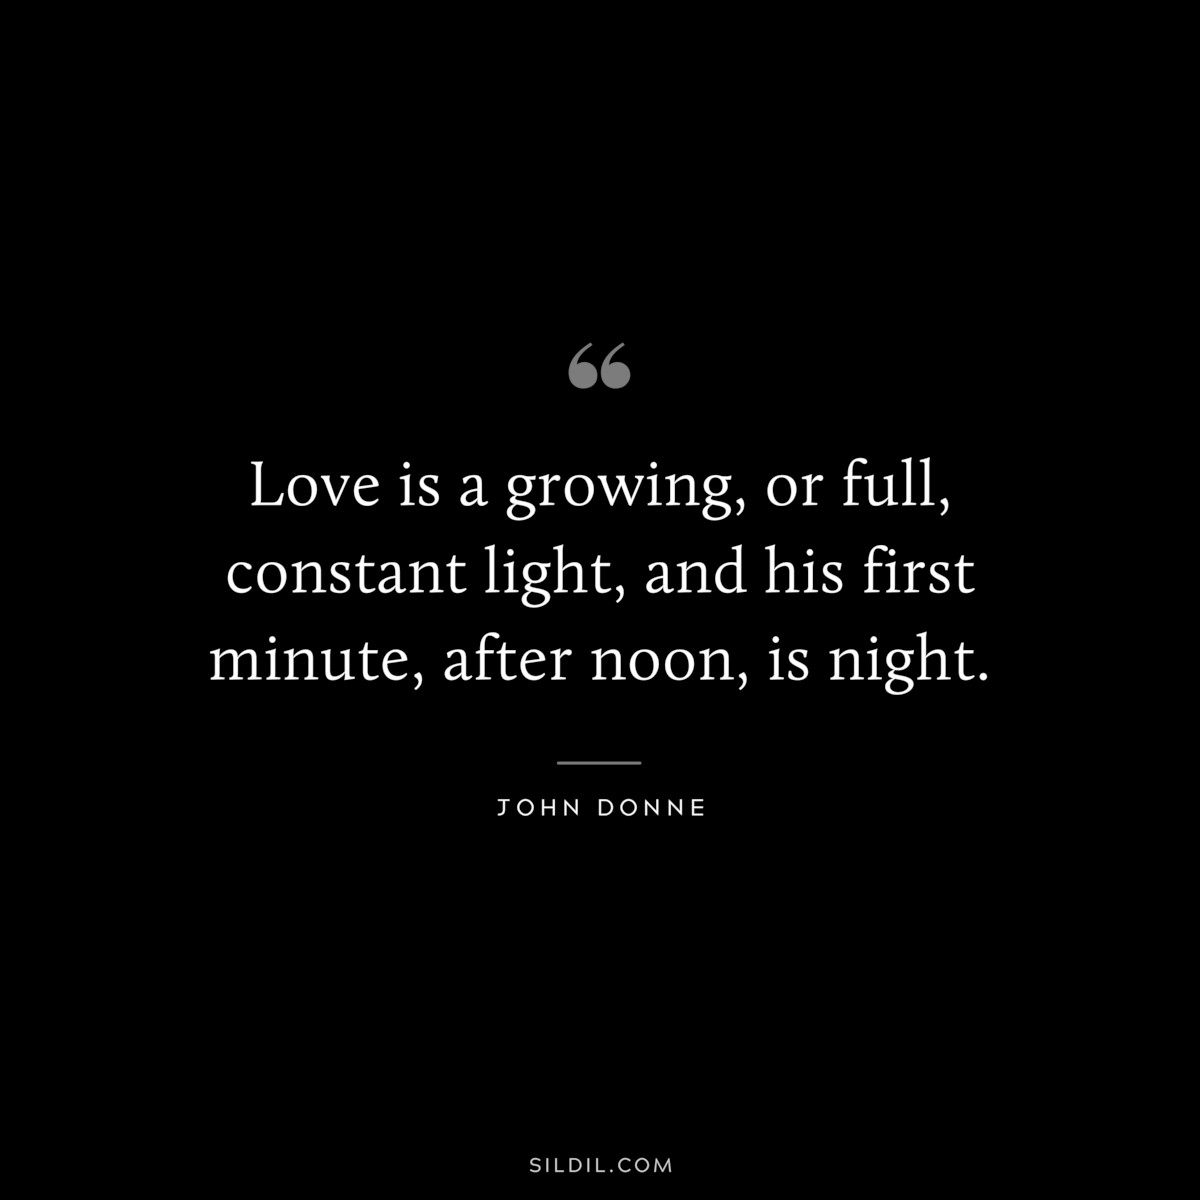 Love is a growing, or full, constant light, and his first minute, after noon, is night. ― John Donne